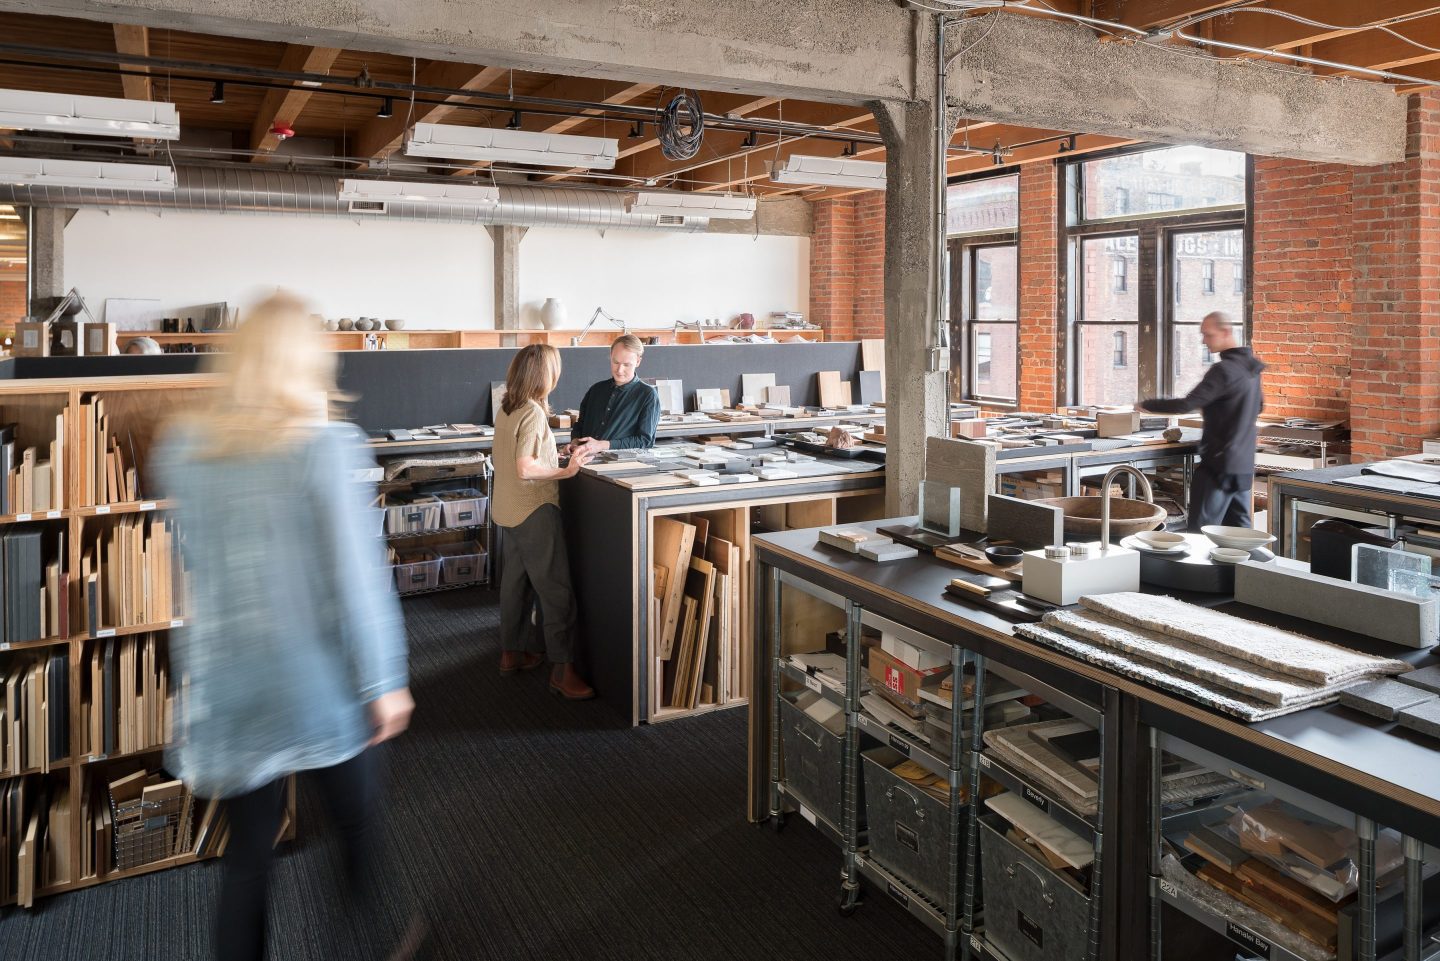 Olson Kundig designs own office interior with cityscape timber table